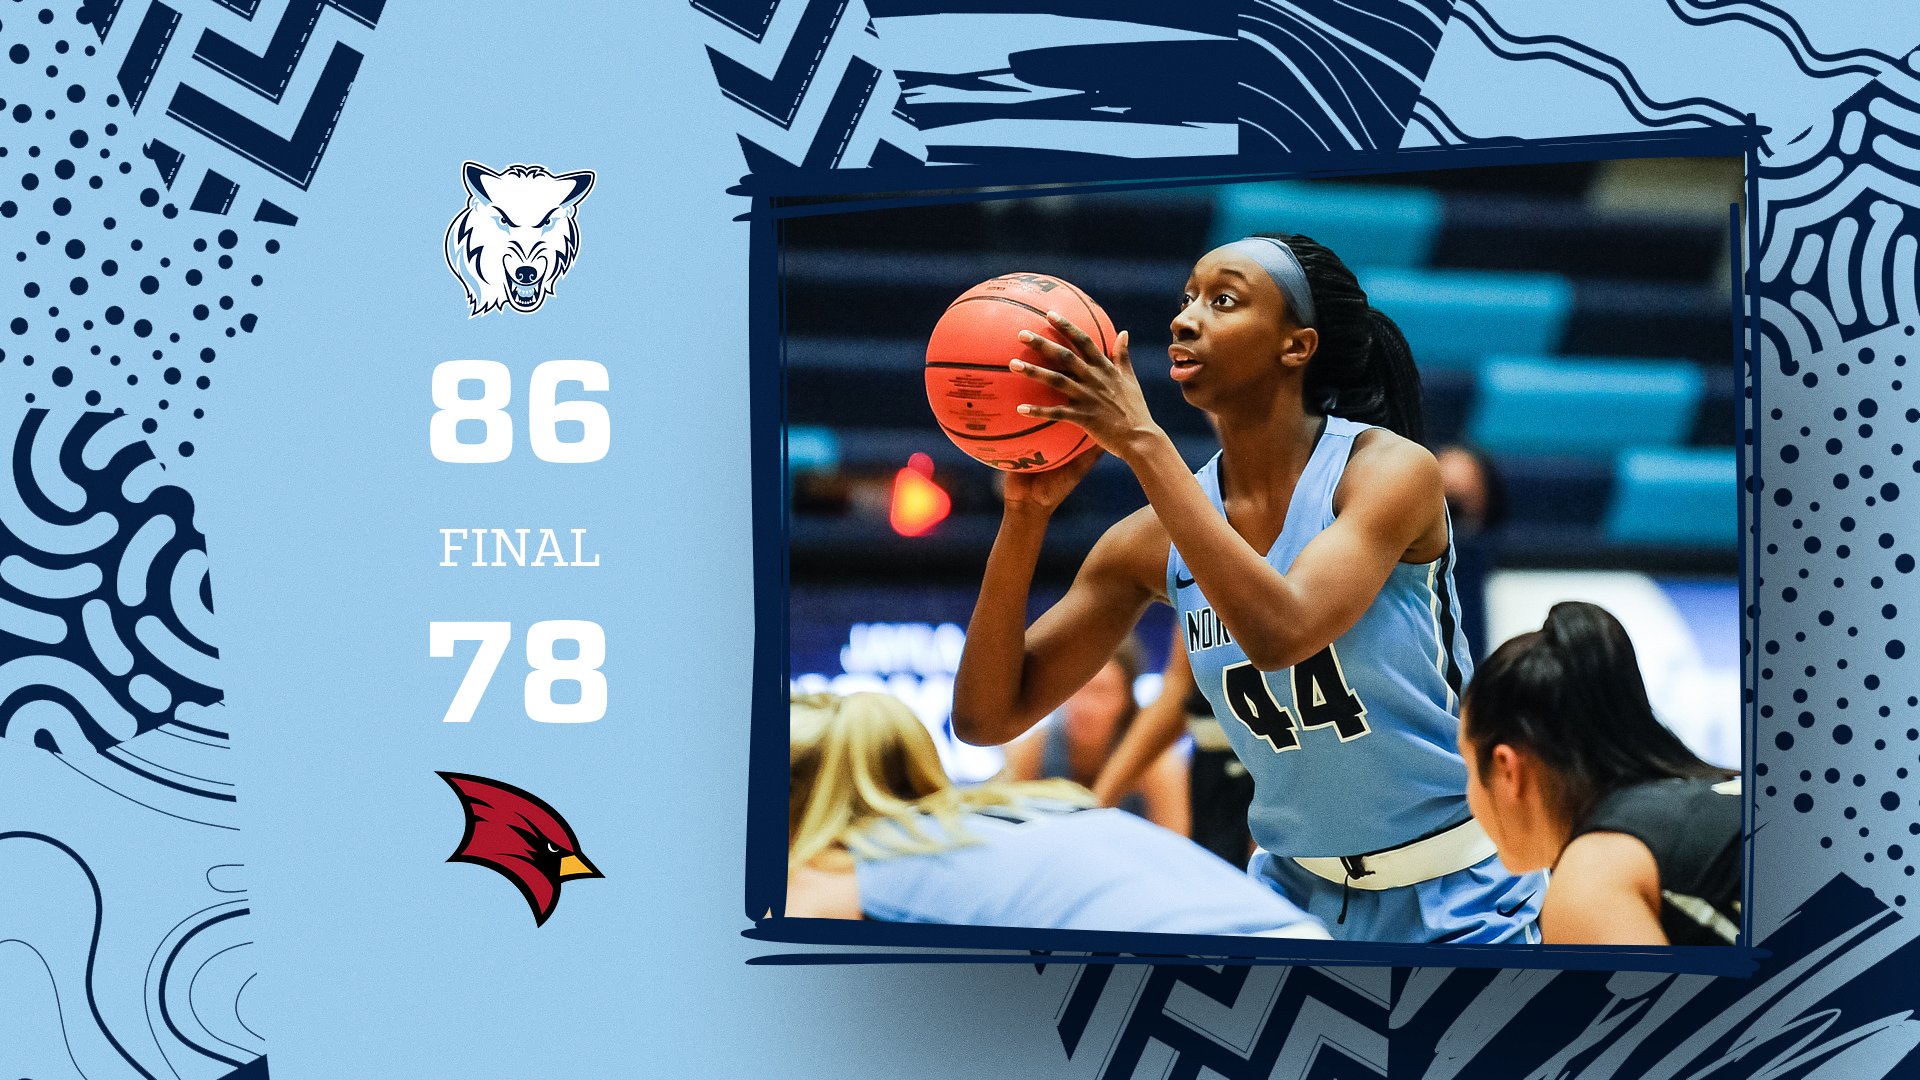 Women's Basketball Opens Season With 86-78 Win Over Rival Saginaw Valley